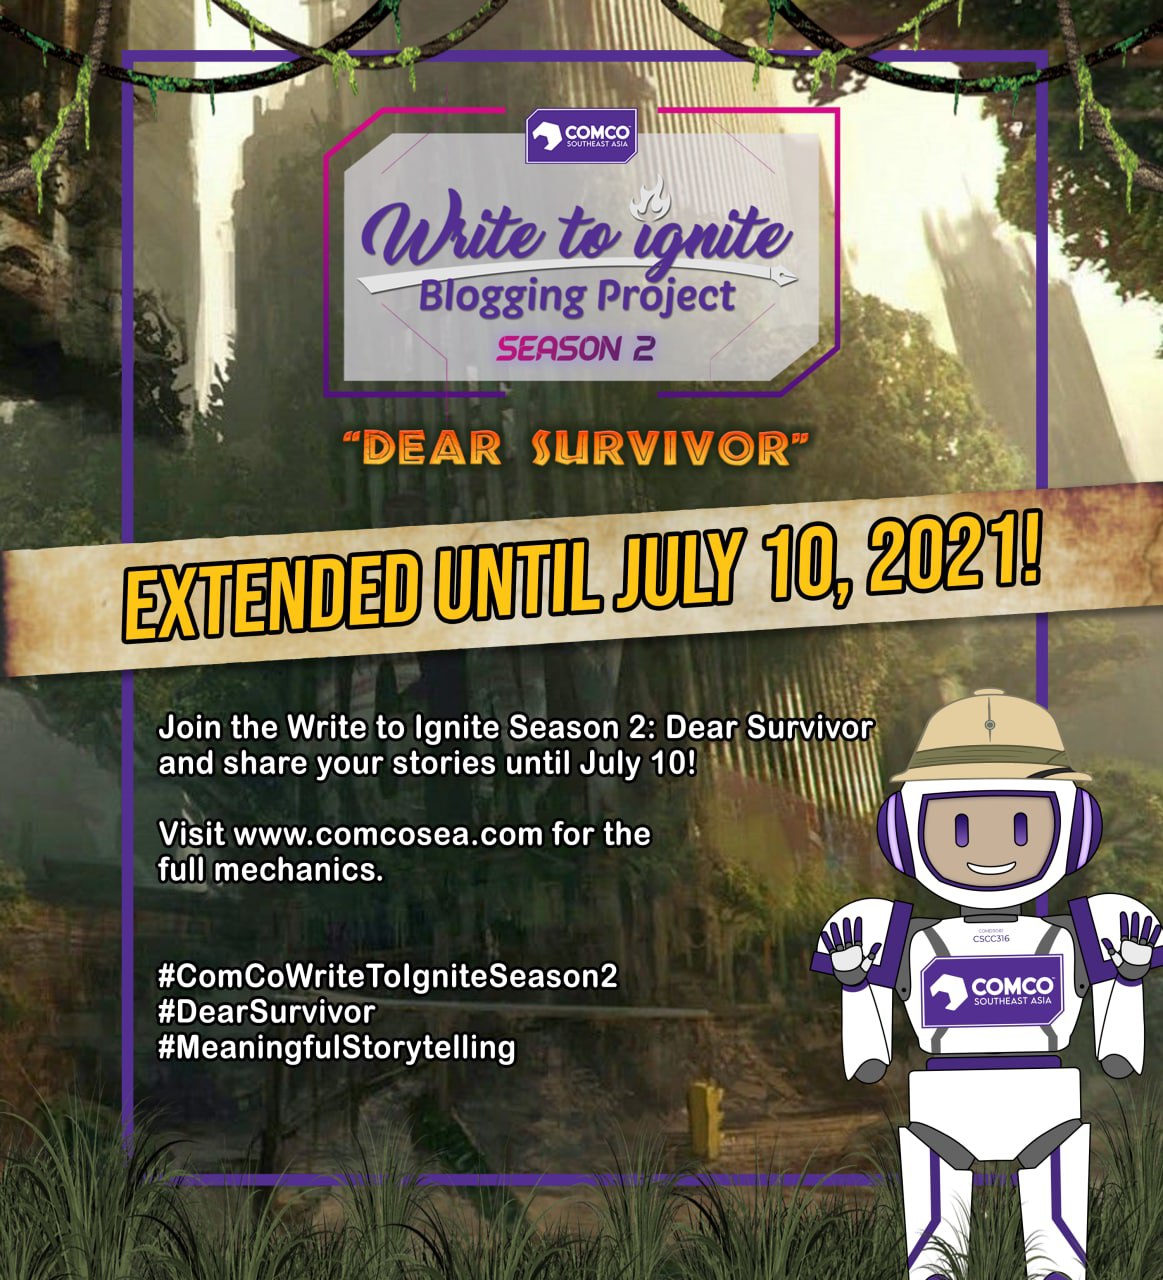 ComCo Southeast Asia Write to Ignite Blogging Project Season 2 Dear Survivor Extended Submission